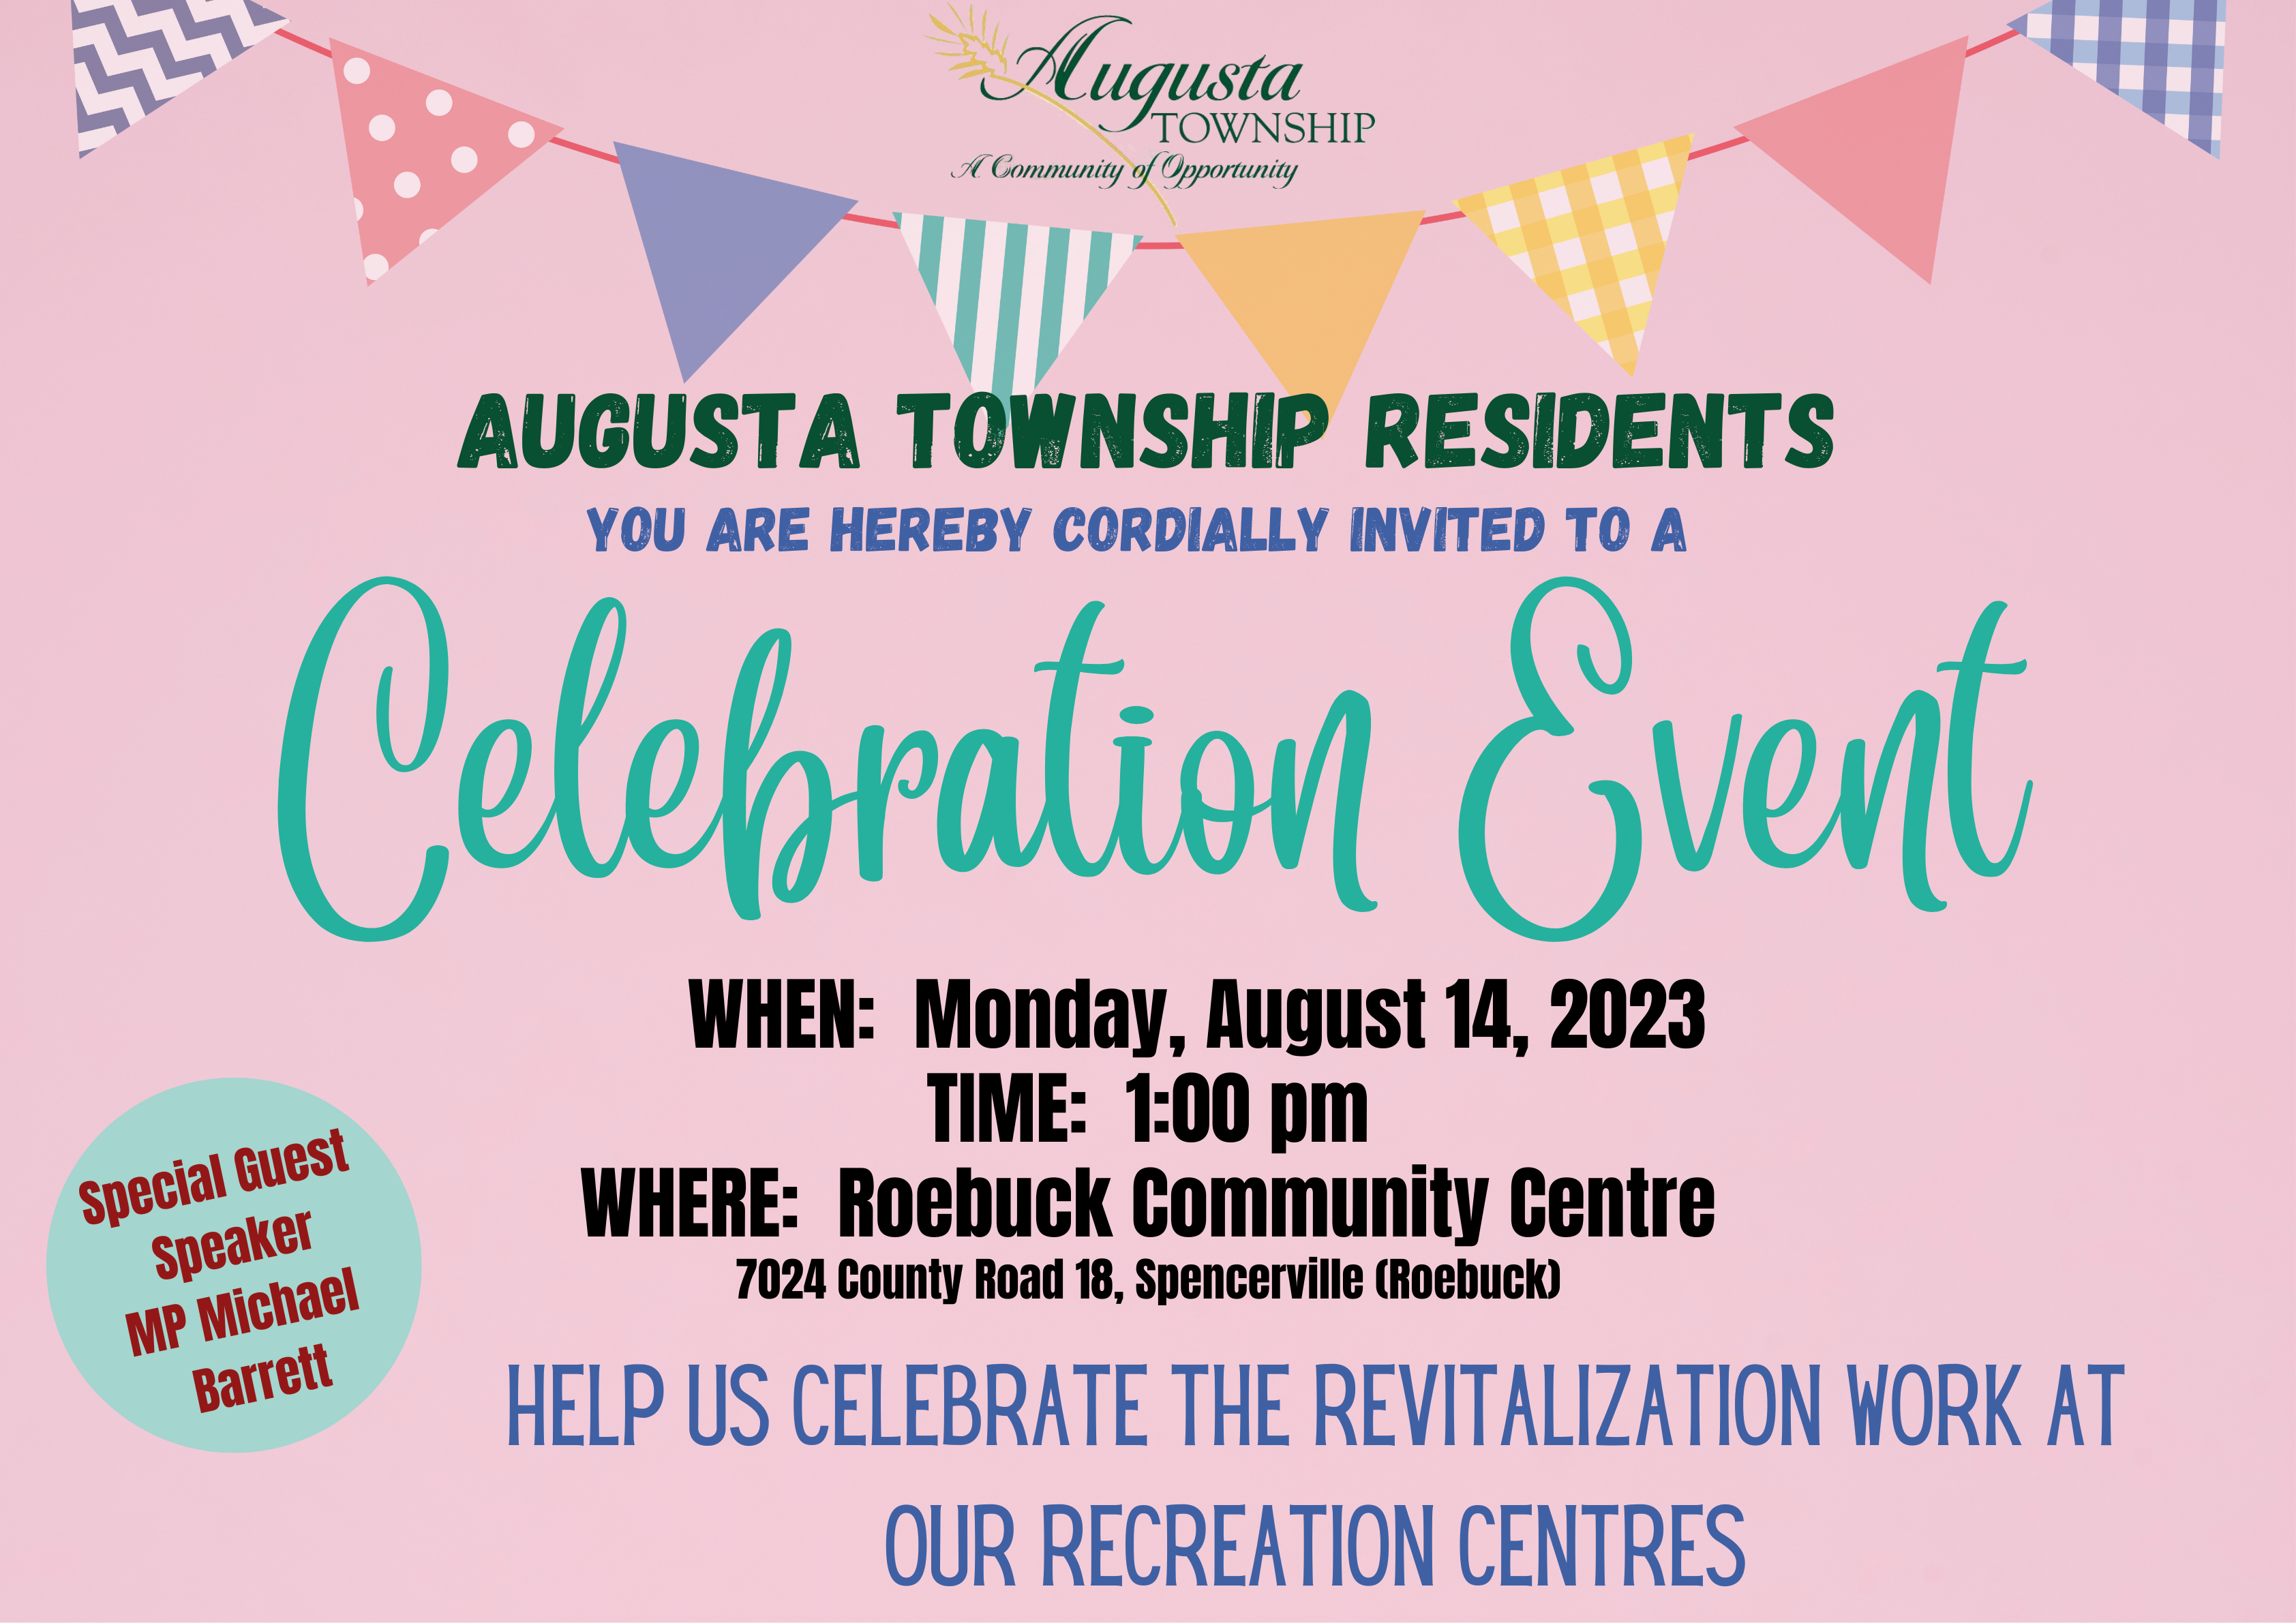 poster for a celebration event on August 14, 2023 at 1pm at the Roebuck Community Centre to celebrate the revitalization work at our recreation centres